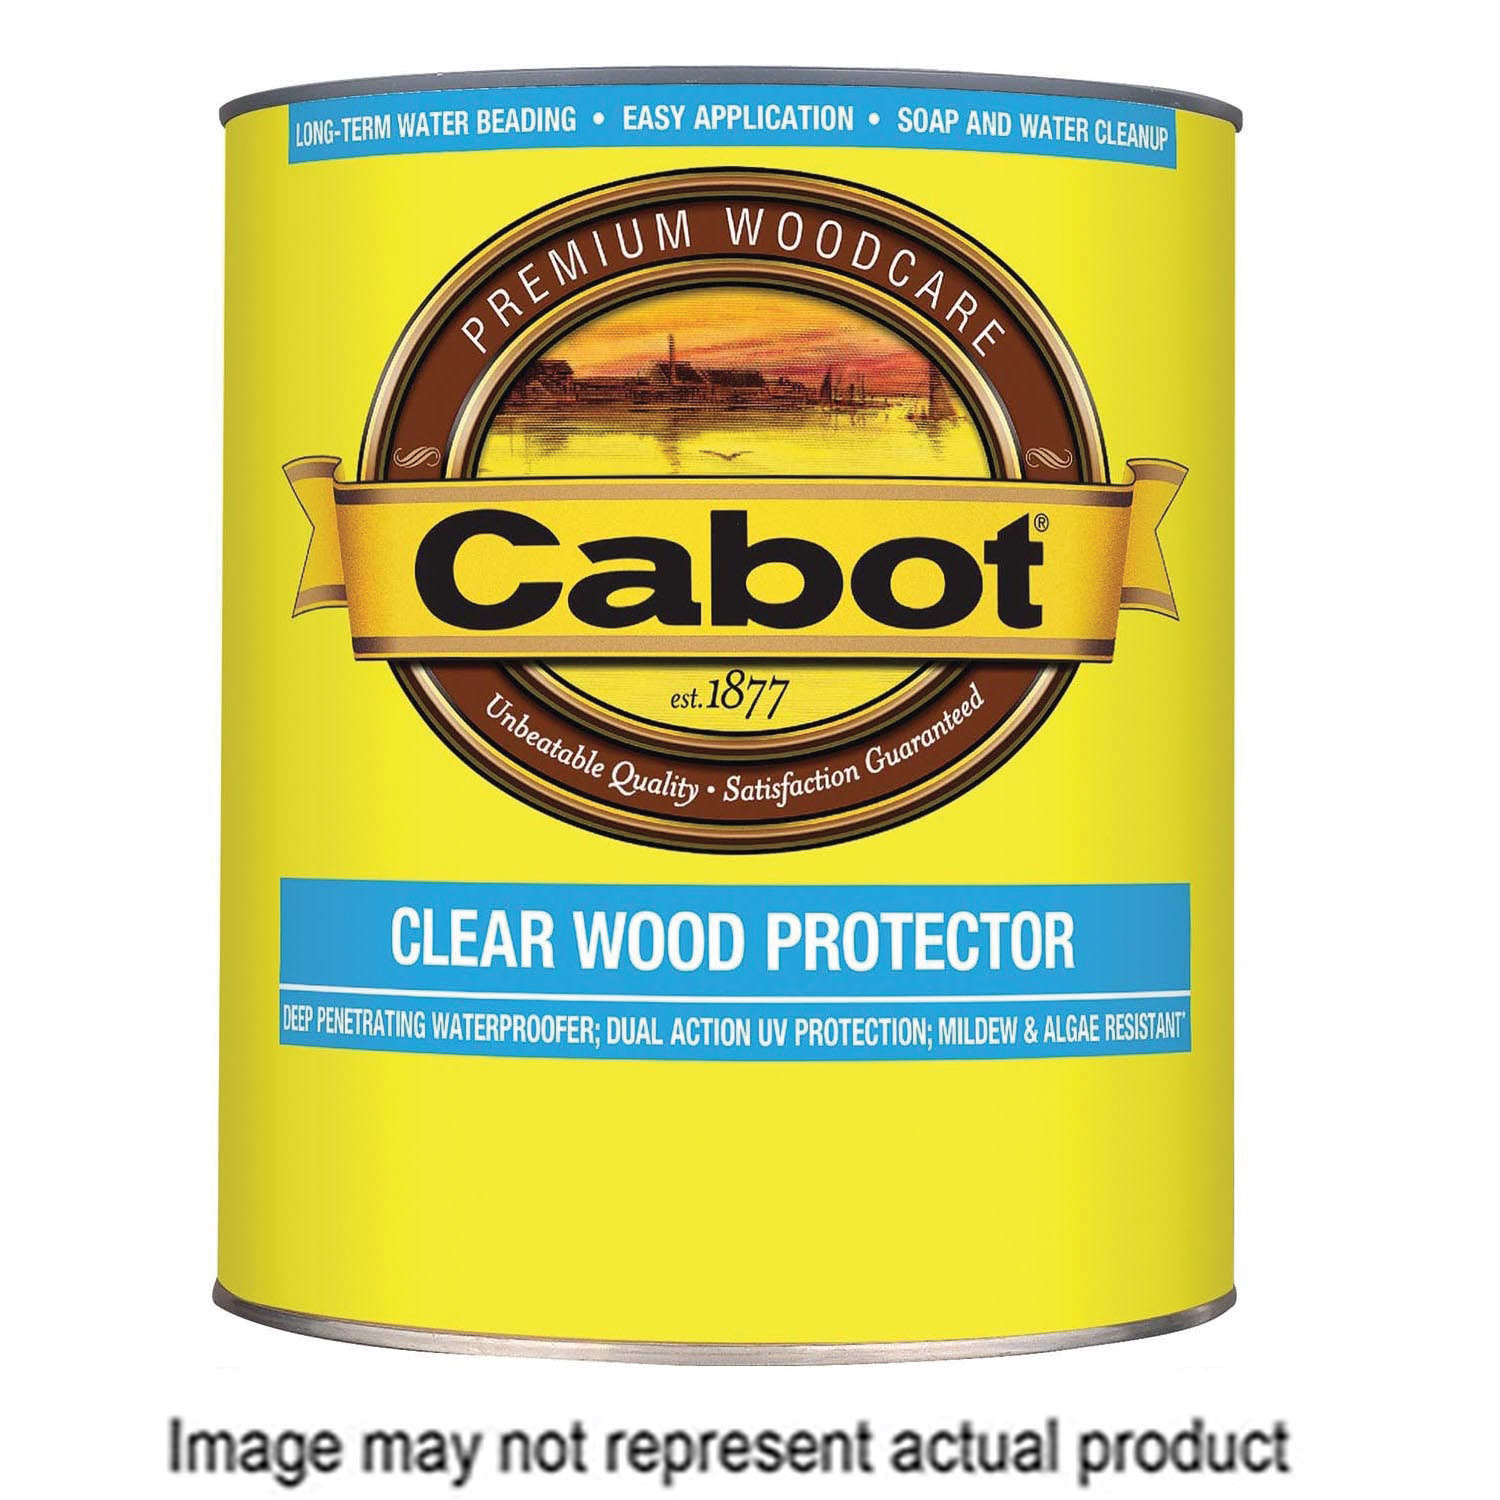 Cabot 140.0002101.007 Wood Protector, Liquid, Clear, 1 gal - 2